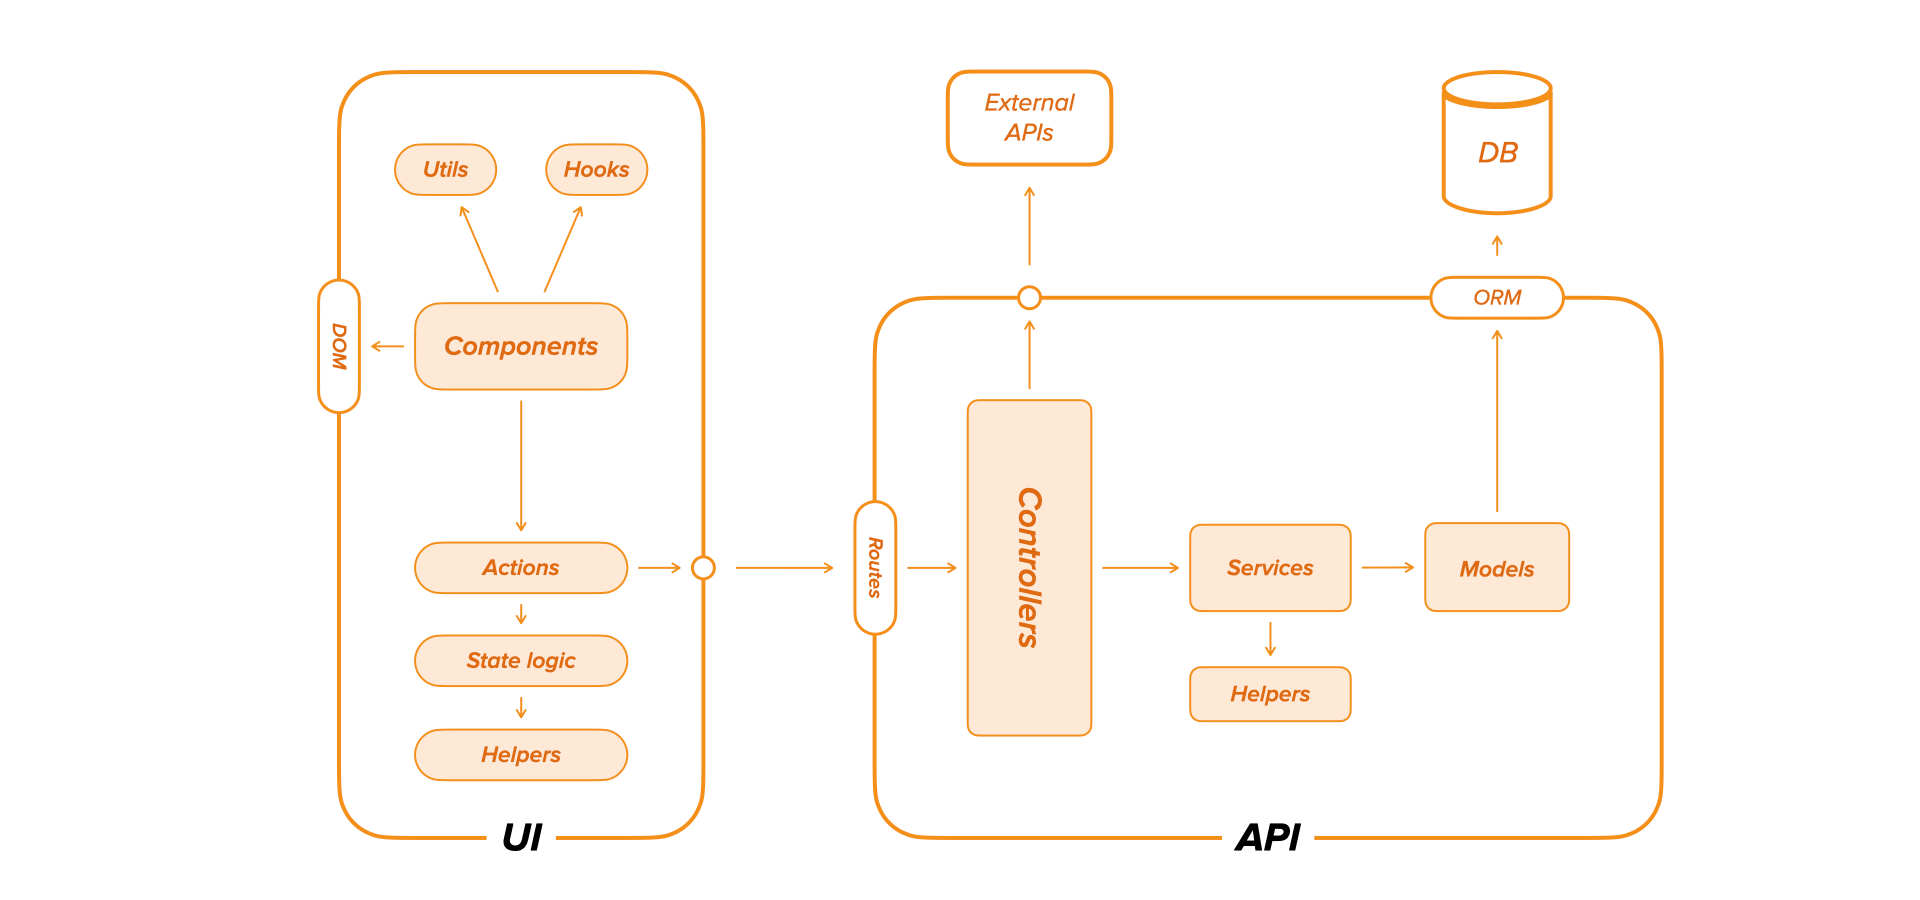 A detalied architecture diagram, highlighting the full integration of the entire system, when using an end-to-end approach.